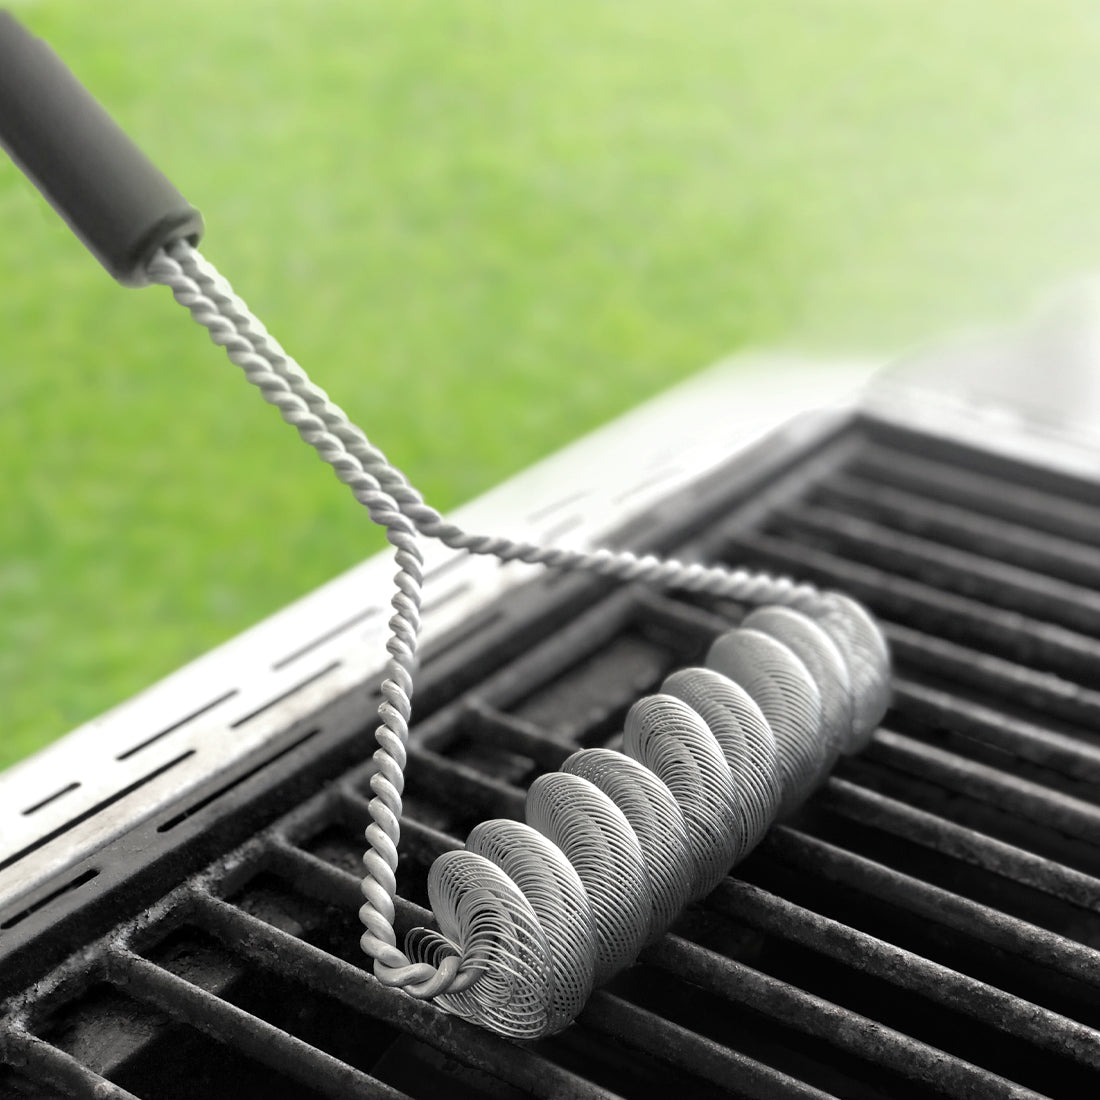 Rada Cutlery Grill Brush laying on top of grate on grill cleaning it.